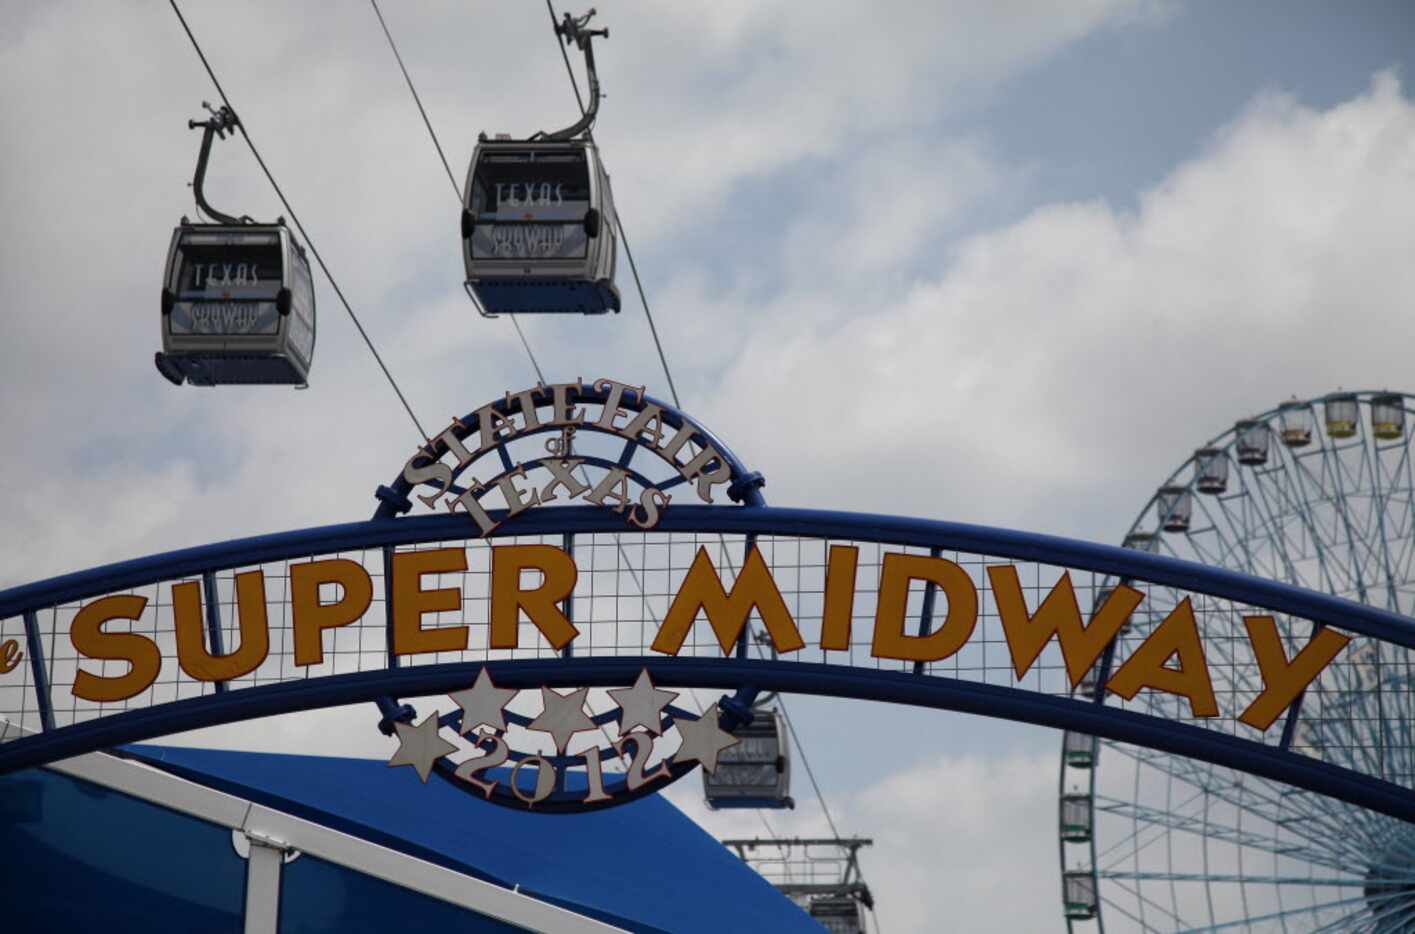 The Texas Skyway travels above the Midway